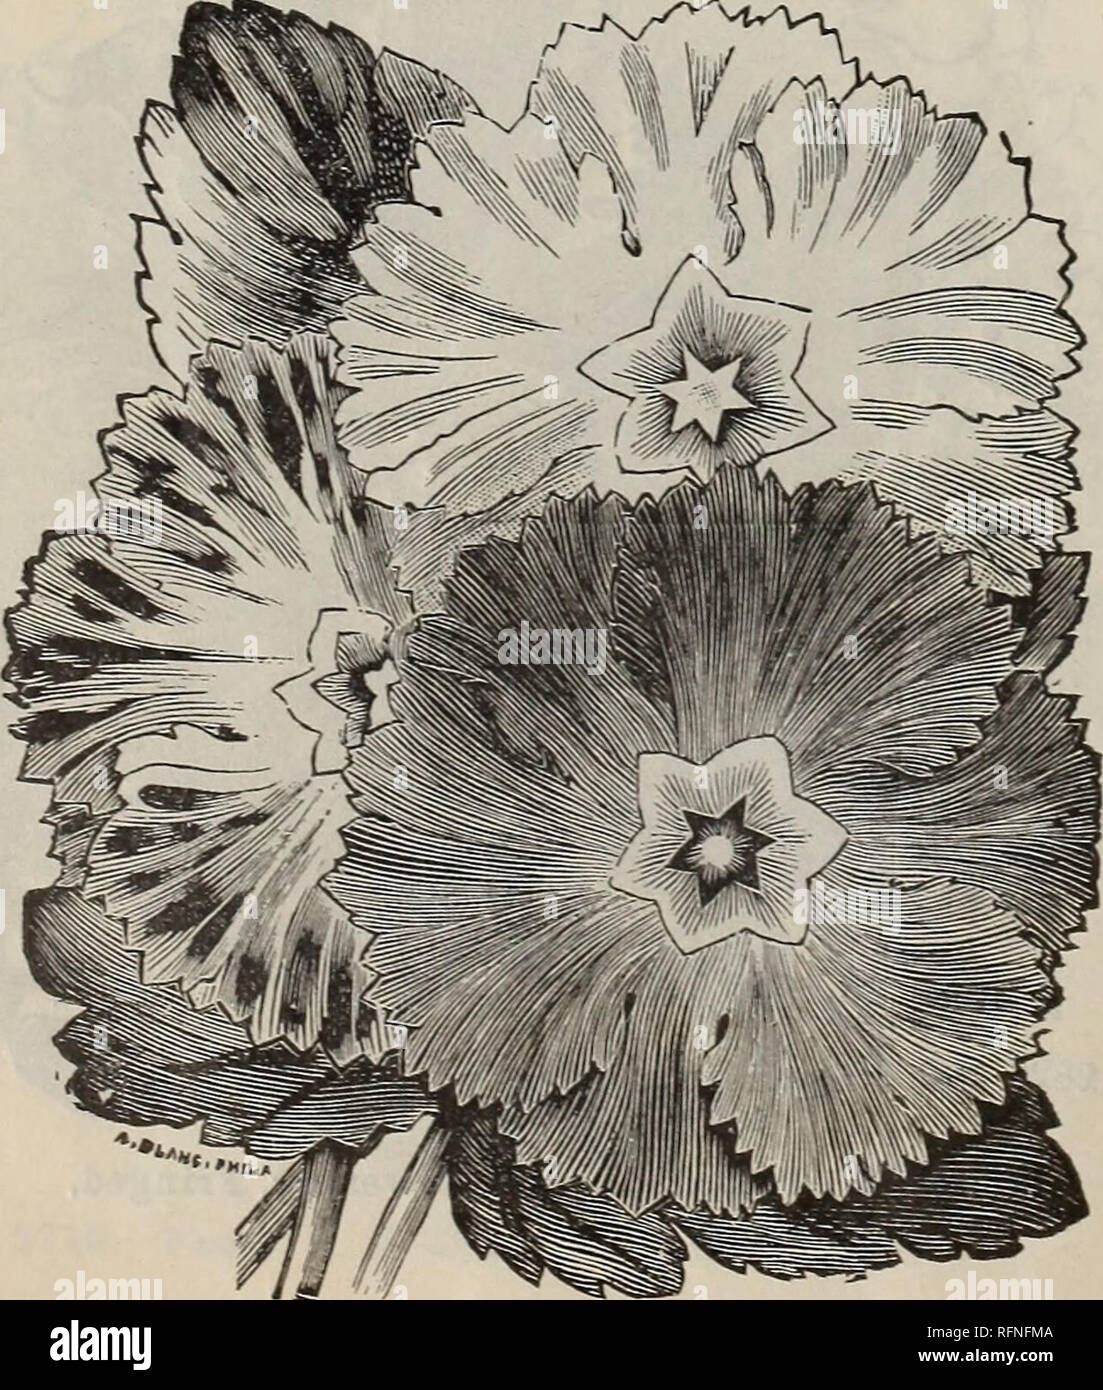 . Seeds : wholesale price list. Nursery stock New York (State) Catalogs; Plants, Ornamental Catalogs; Vegetables Seeds Catalogs; Flowers Seeds Catalogs; Seed industry and trade New York (State) Catalogs. No. 3010.—Primula, Lg. Fig. Fringed, Fern-leaved.. Cat. &gt;o. oz. tr.pkt. pkt Matricaria, see Pvrethrum, No. 3022-28. 2508 *Maurandia Barclayana, mixed SI.00 15 5 Mesembi yanthemum Crystallinum, see Ice Plant, No. 2380. 2512 *—Tricolor (Dew plant) 25 10 d 2514 — Cordifolium Variagatum, for bed- ding 5.00 35 5 2516 — Tigrinum, rare succulent, 1,000 seeds. 2.00 30 10 2518 *Mignonette, lg. fig., Stock Photo